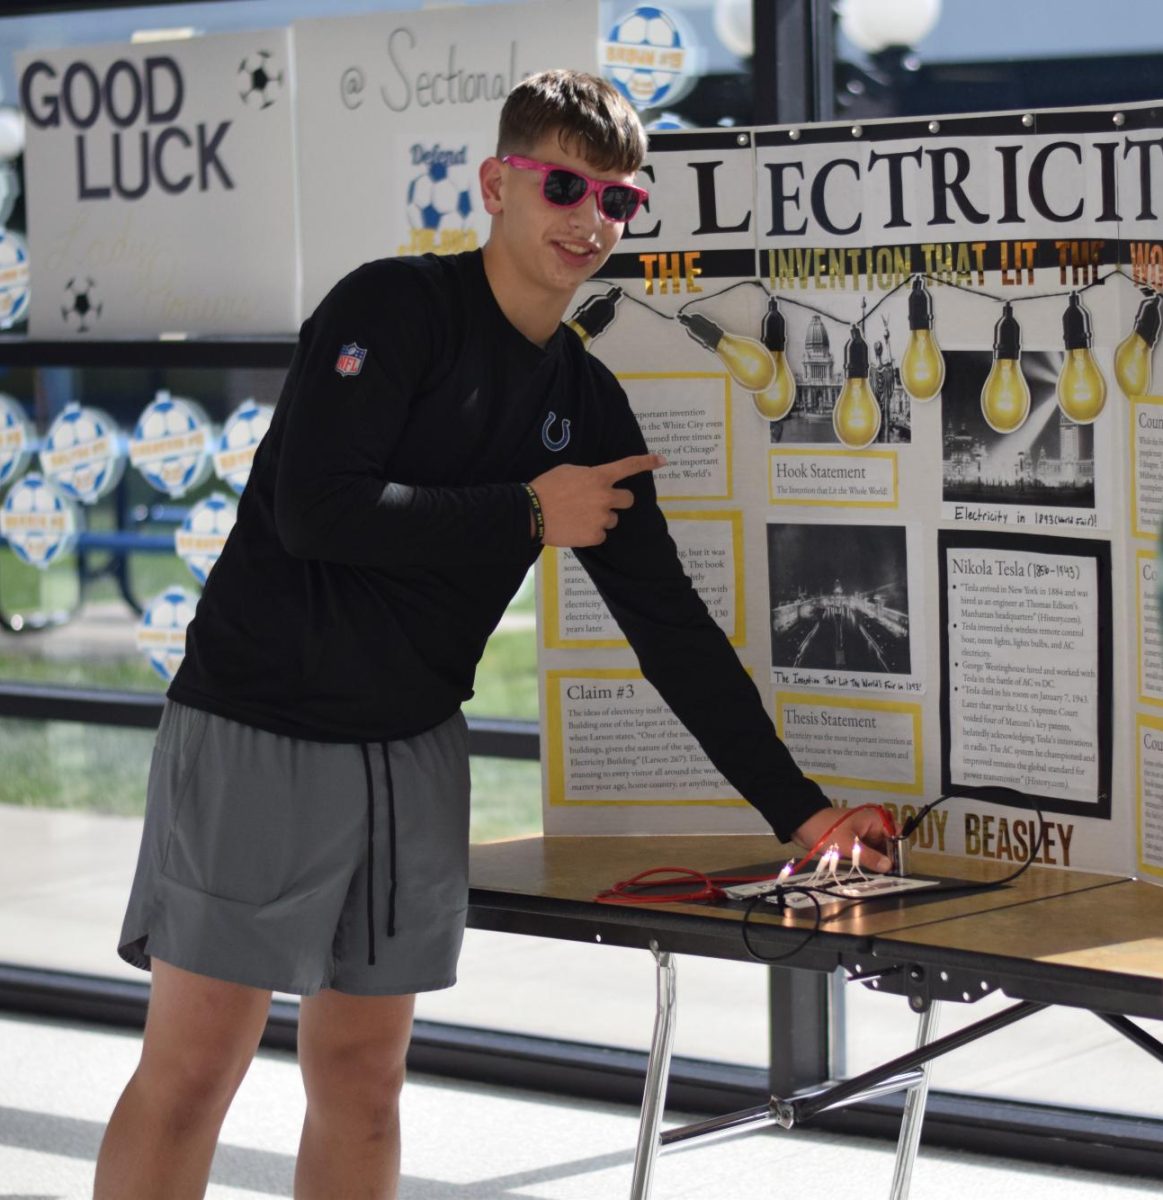 Freshman Brody Beasley demonstrates how his model of the electricity from the fair actually lights up.